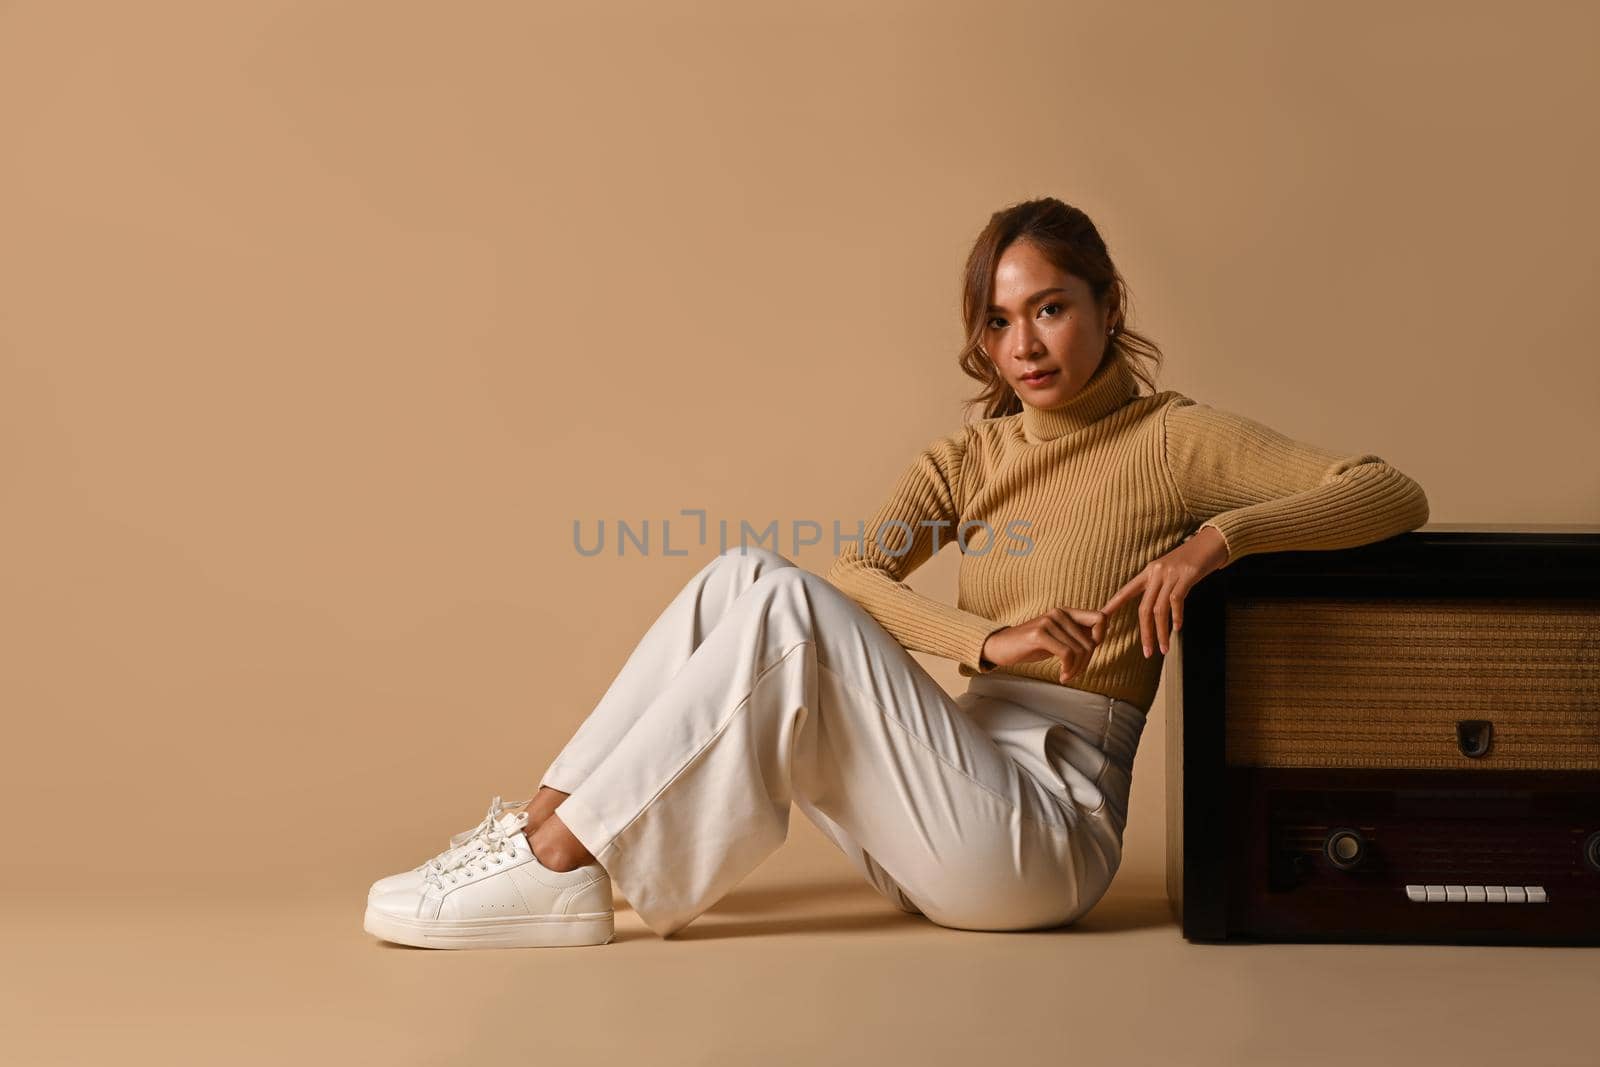 Fashion studio photo of young woman posing near a vintage radio over on beige background. Autumn fashion and beauty concept by prathanchorruangsak